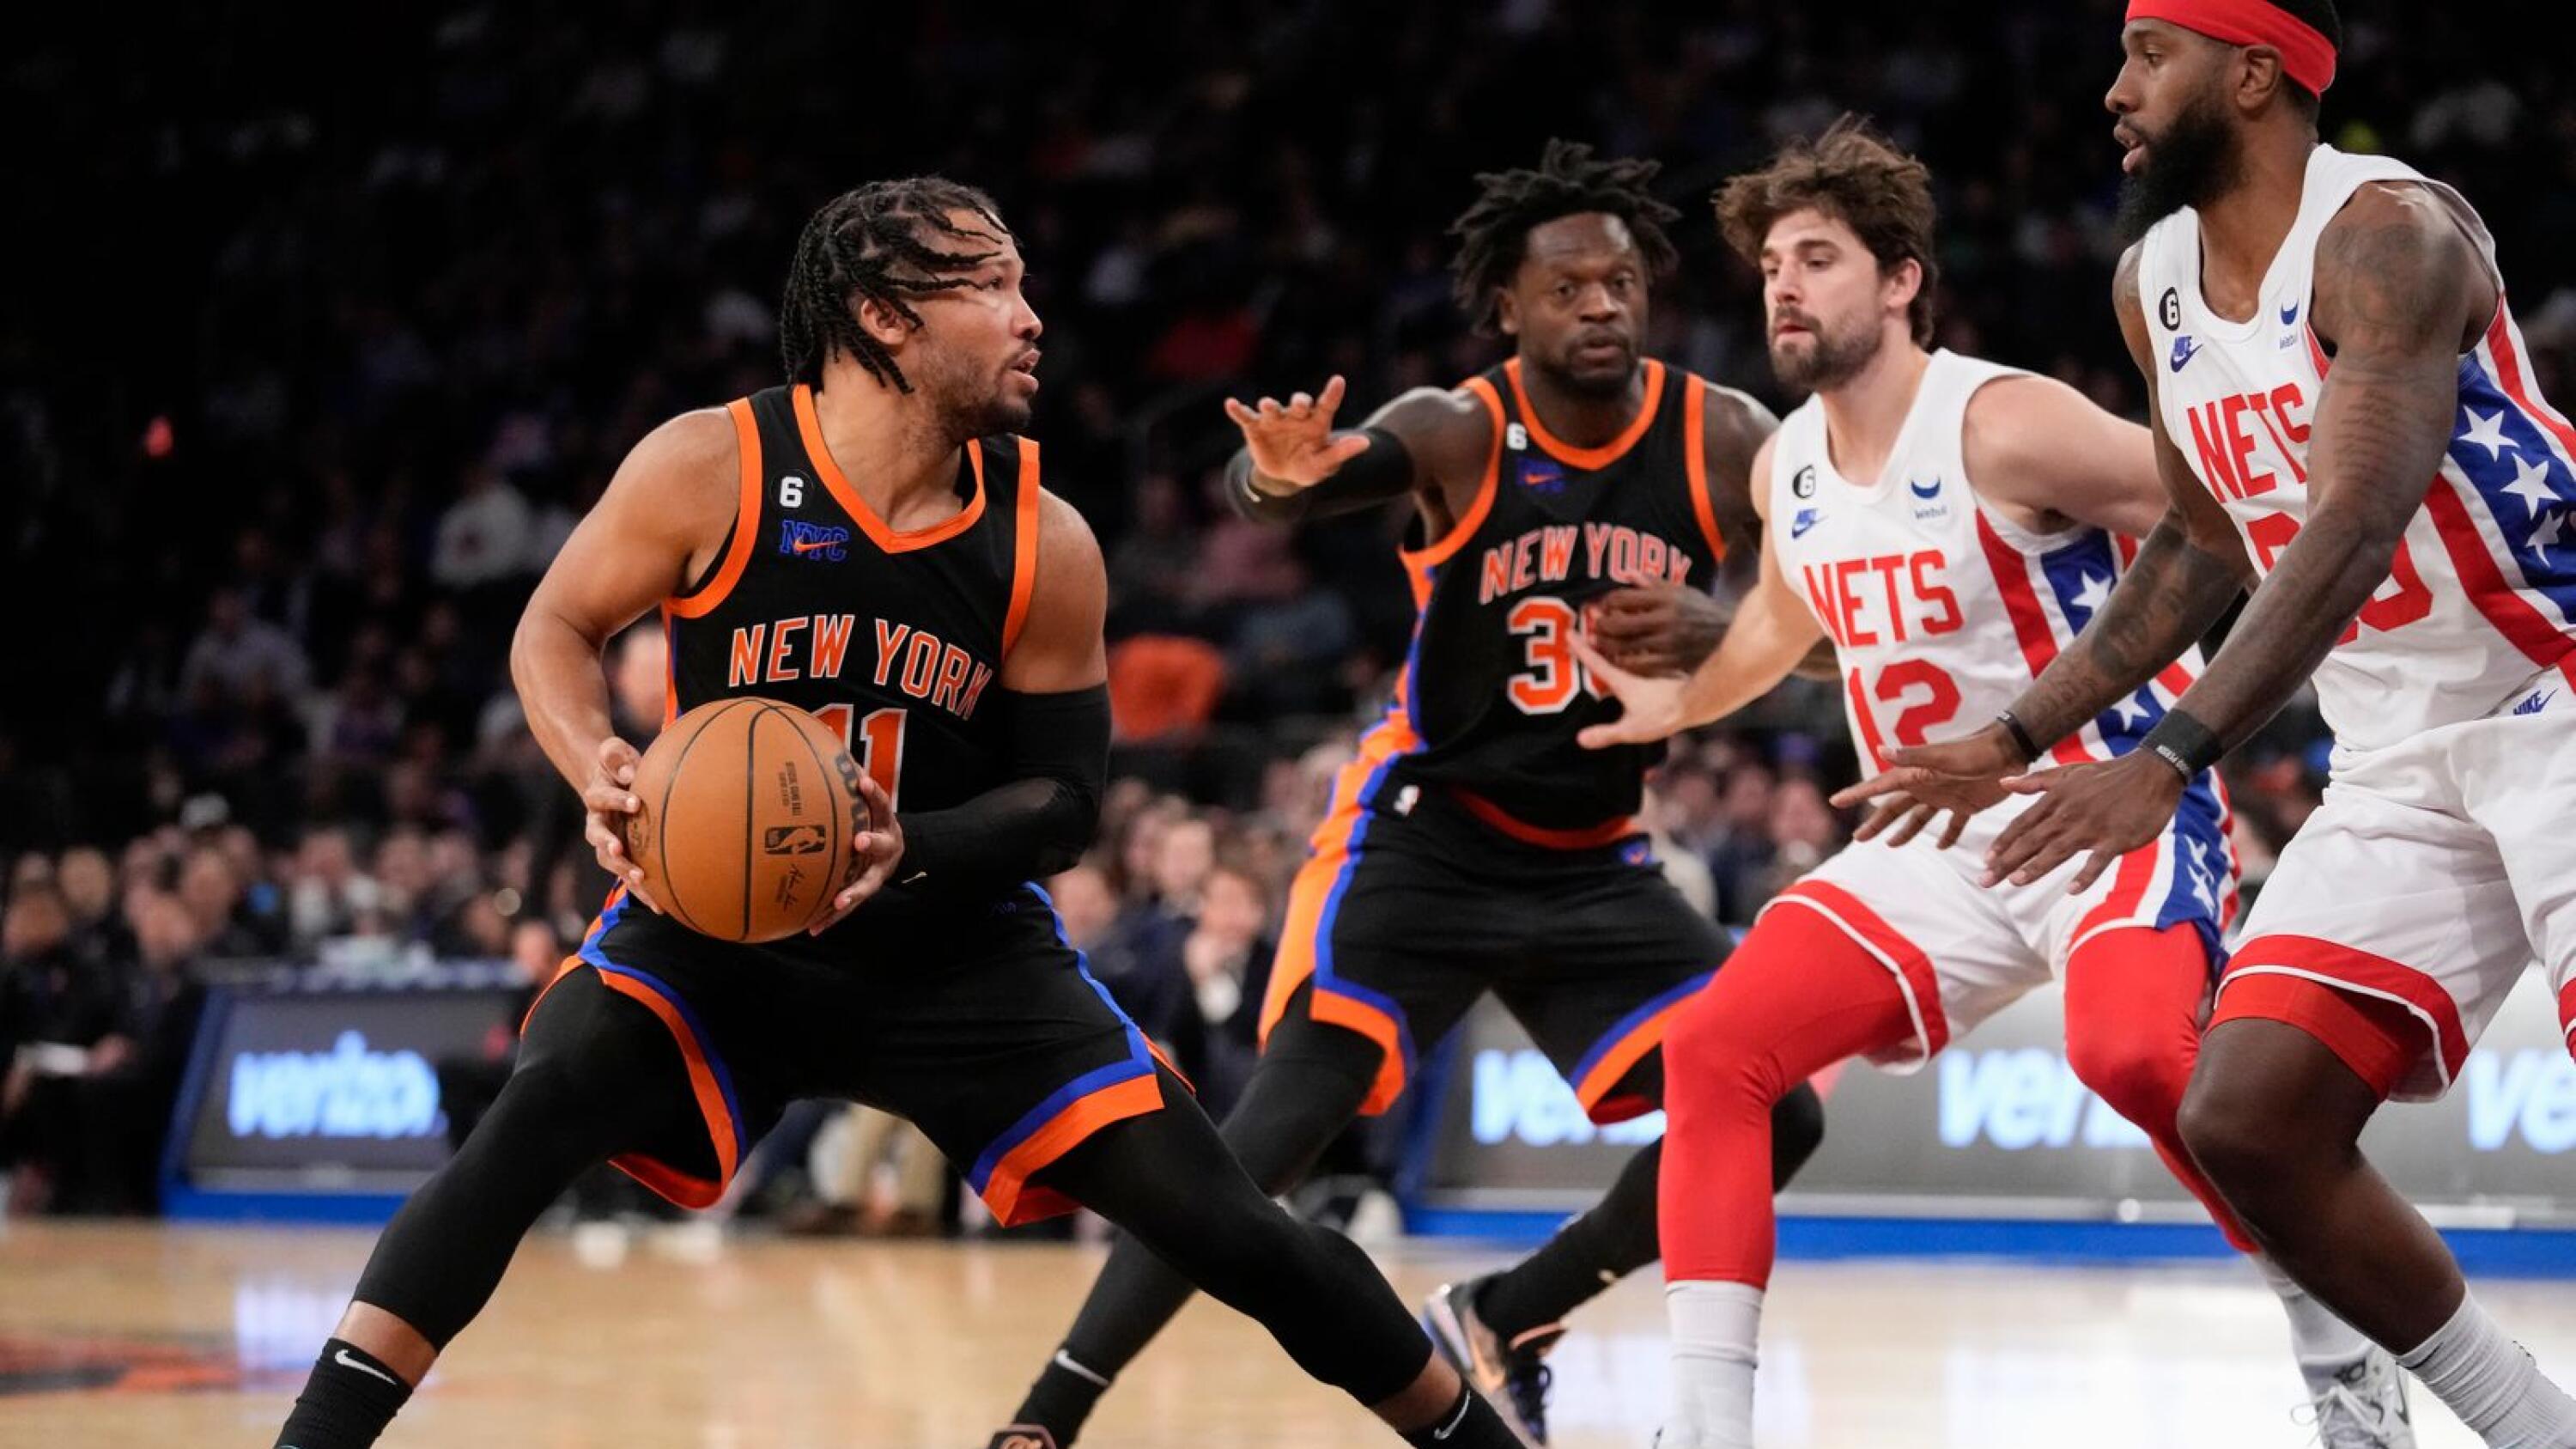 Brunson scores 39, Knicks rout Nets 142118 for seventh straight